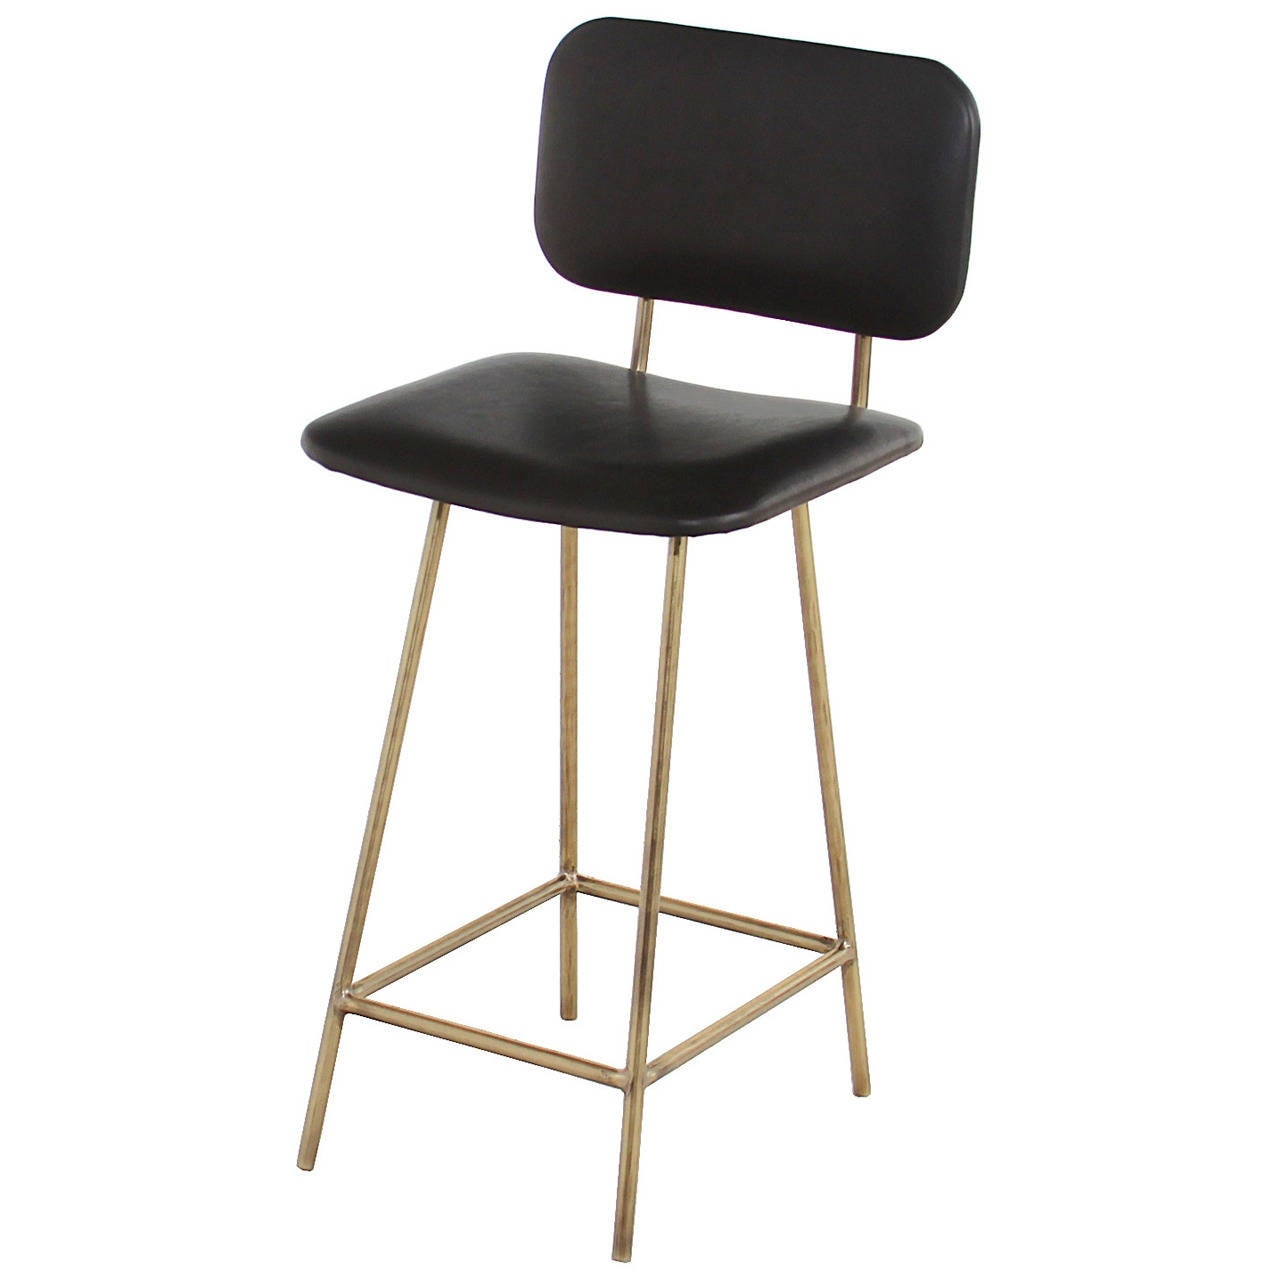 The brass petra stool from a unique collection of antique